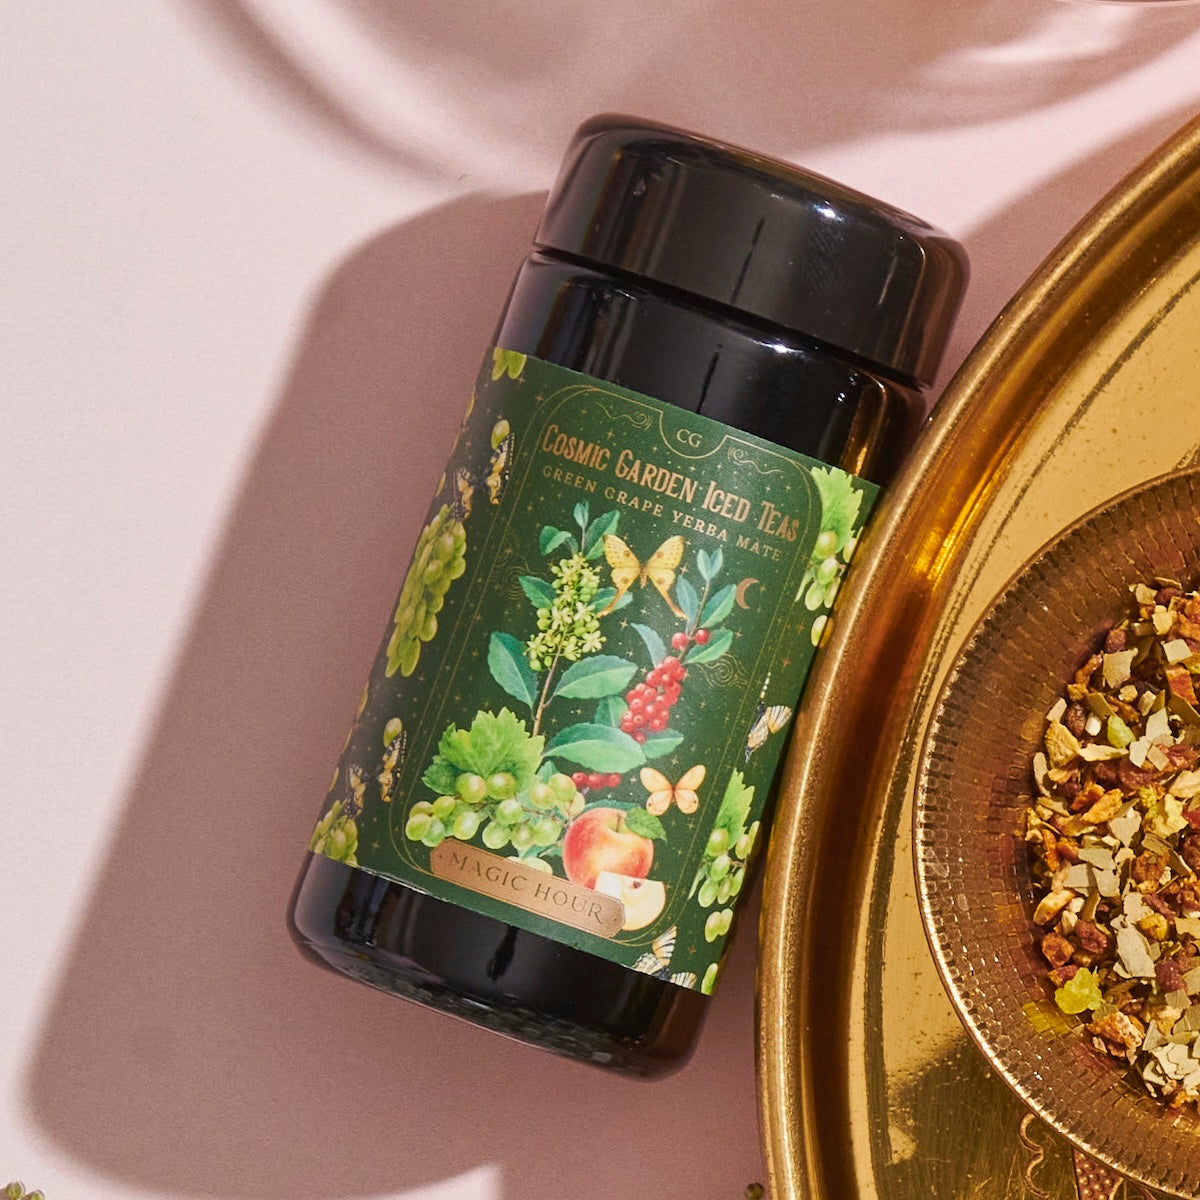 A black cylindrical container labeled &quot;Green Grape Yerba Mate: Cosmic Garden Iced Tea&quot; from Magic Hour is placed next to a gold dish filled with organic loose leaf tea leaves and herbs. The backdrop is a light pink surface with shadows adding depth.